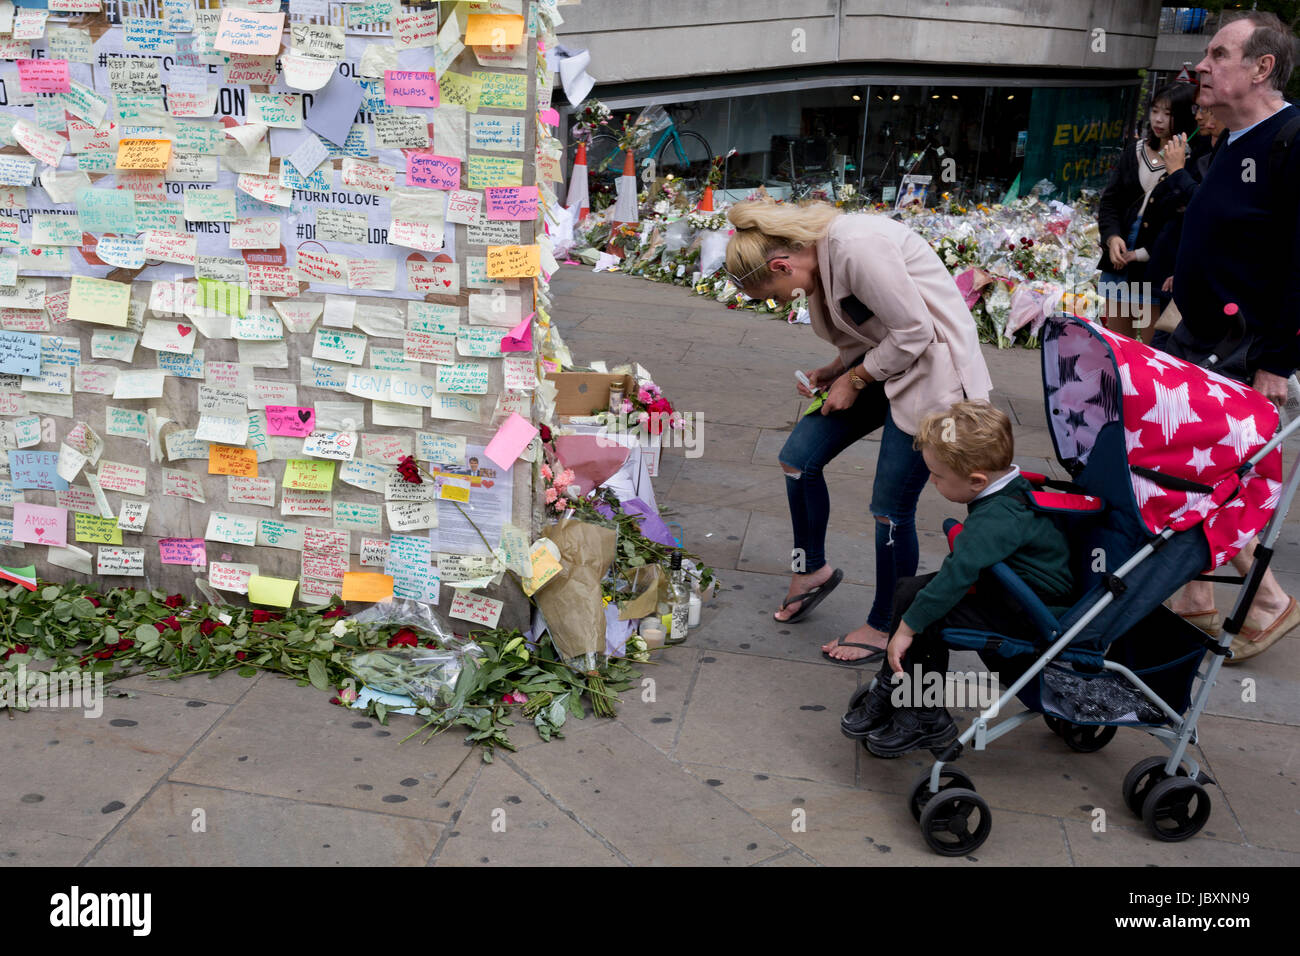 A shrine of flowers and compassionate messages continue to grow ten days after the terrorist attack on London Bridge and Borough Market, on 12th June 2017 in London, England. Near the southern-most boundary of the City of London opposite to the attack location, Londoners and visitors to the capital leave their emotional and defiant poems and personal messages on post-it notes. Stock Photo